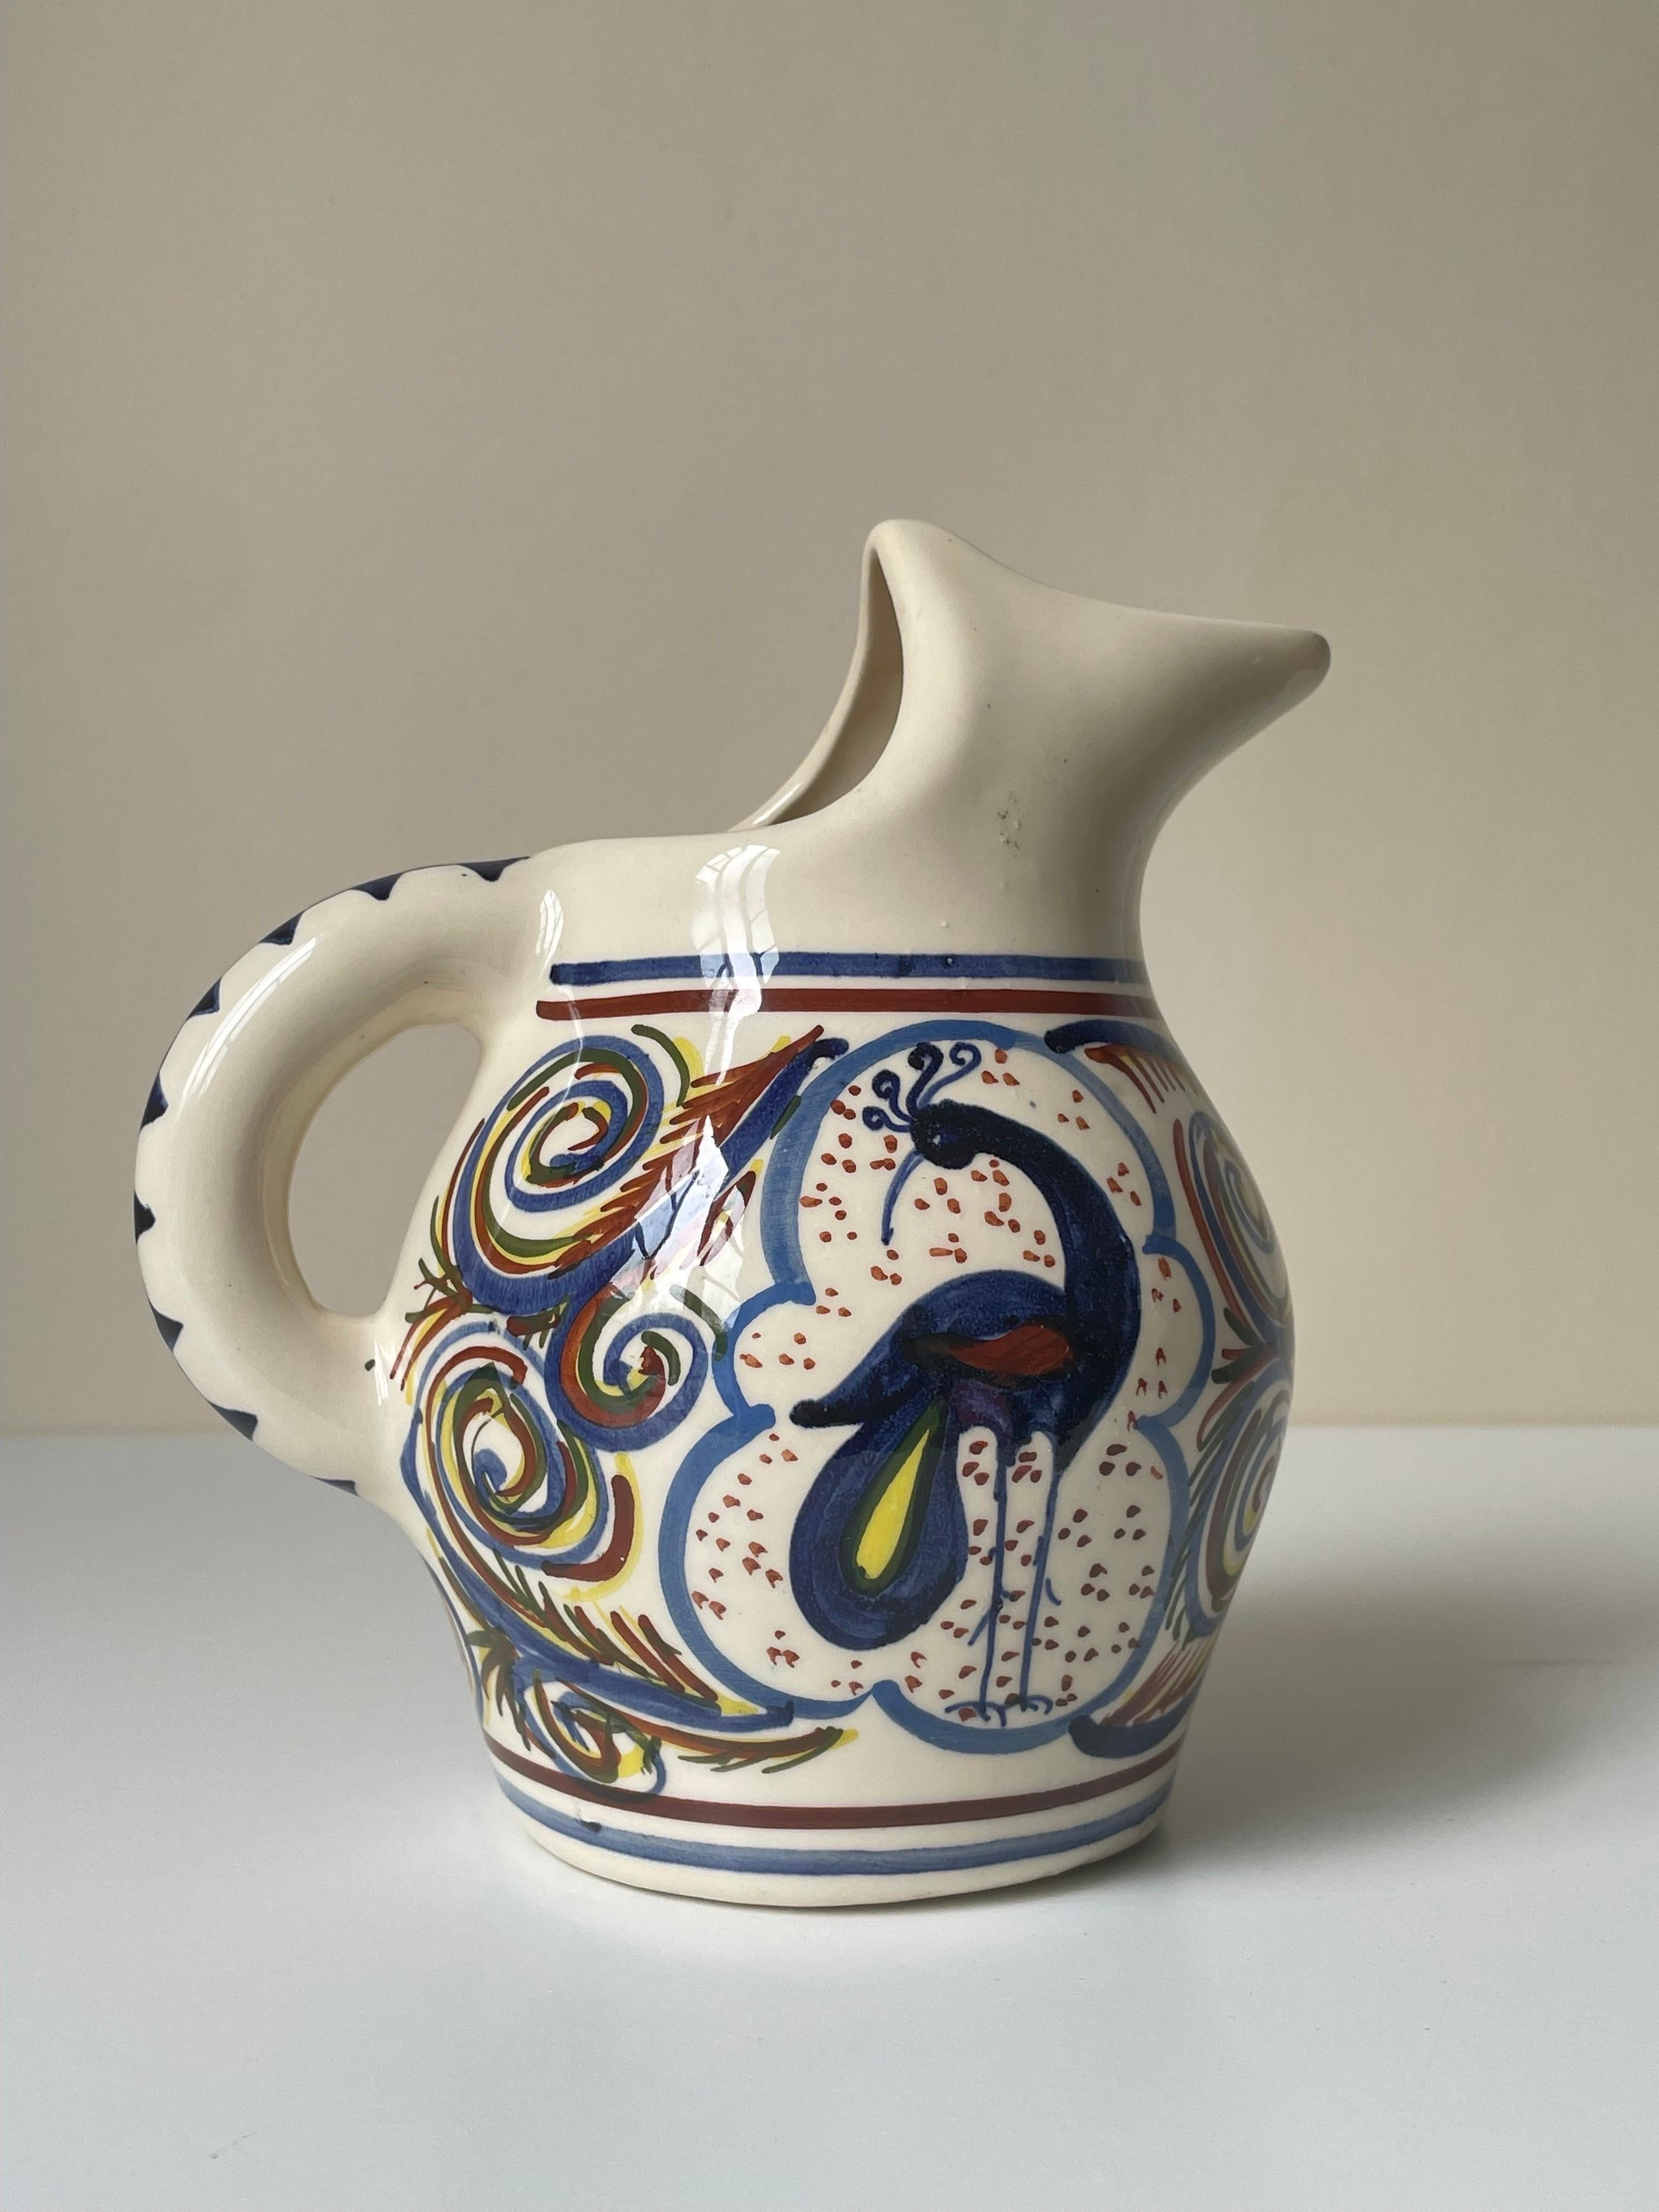 Multicolored hand-painted ceramic pitcher vase. Decorated with multiple lined, swirling, triangular, dotted and organic motifs with a stylized peacock bird in the centre on each side. Blue, brown and yellow colors under clear glaze. Signed under